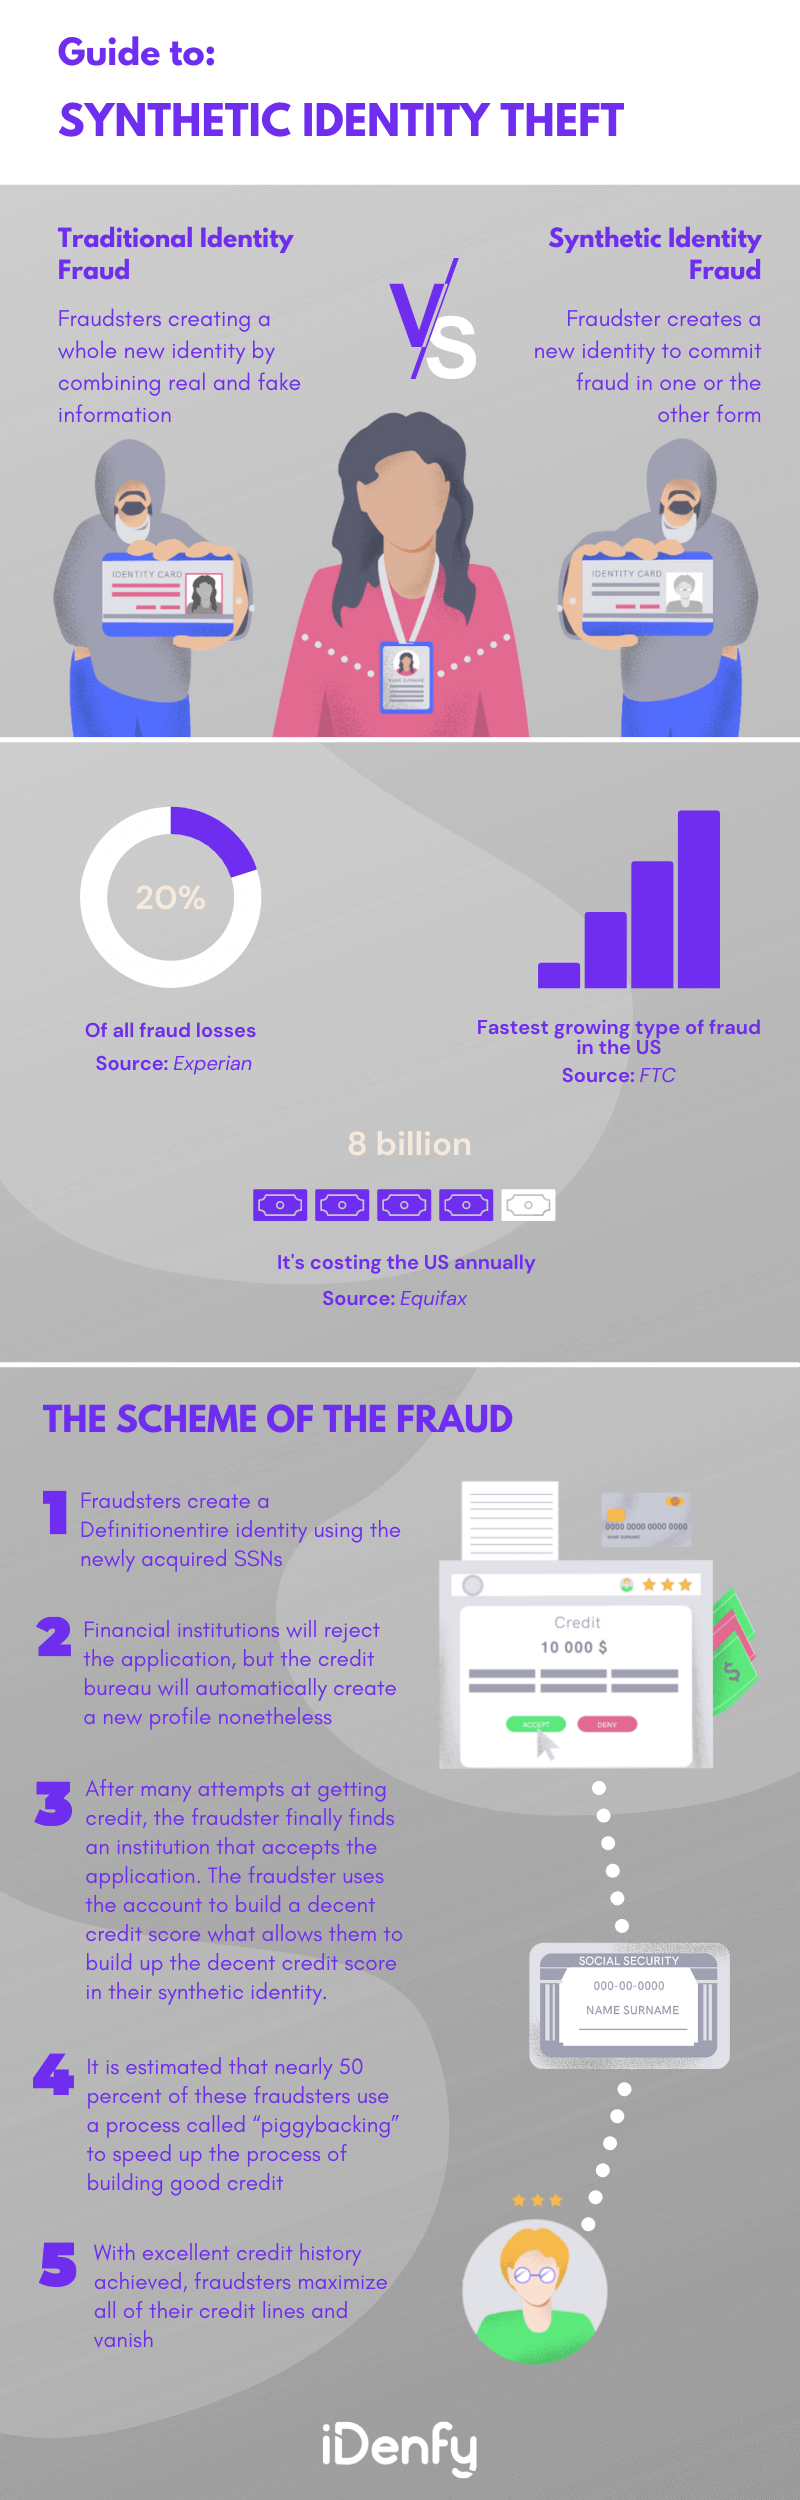 Infographic on synthetic identity theft summarising the main points of the article above